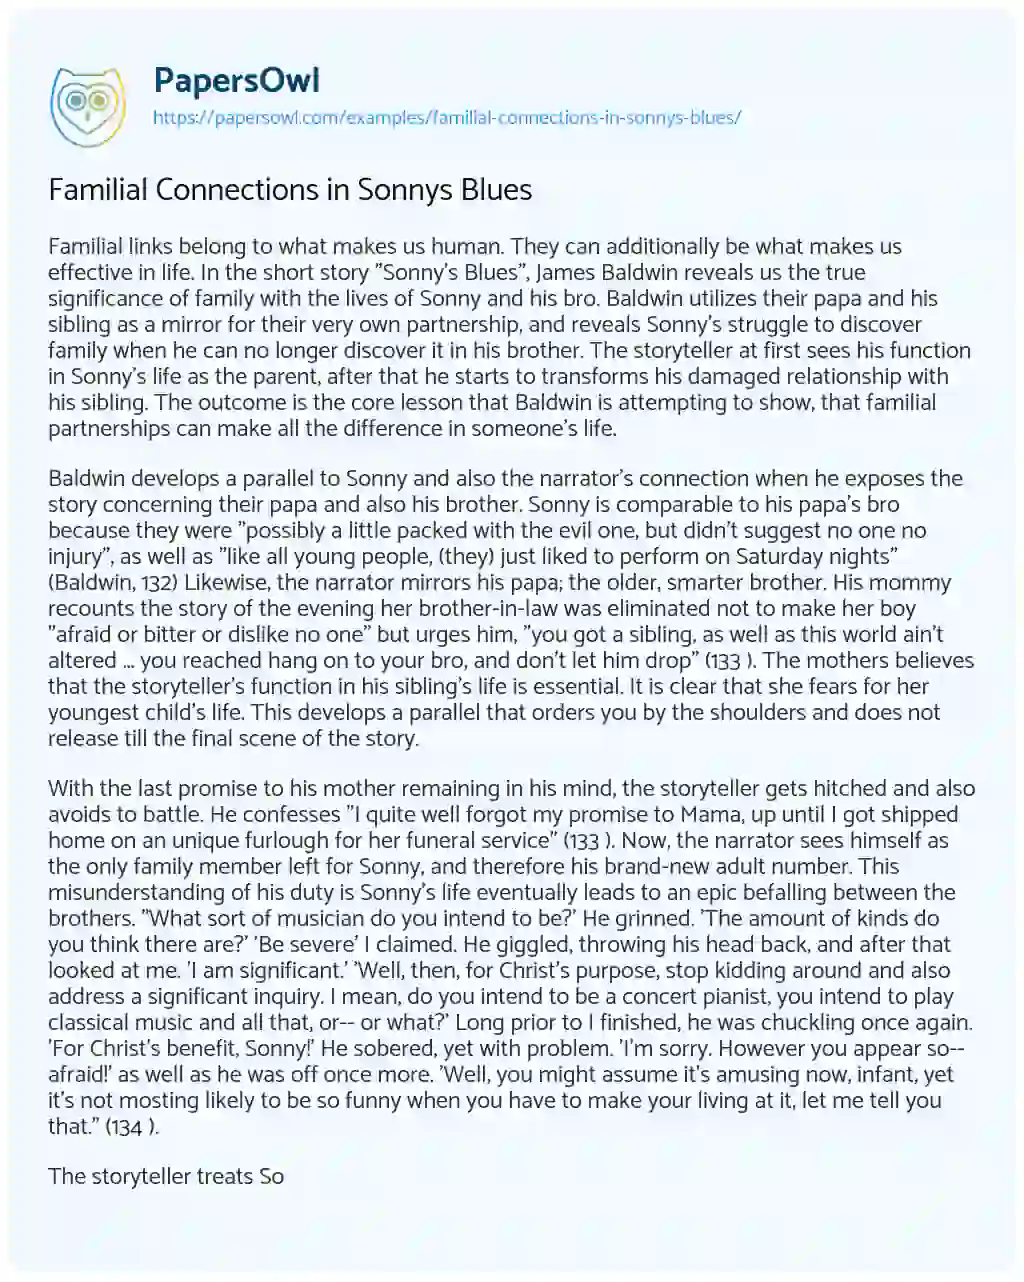 Essay on Familial Connections in Sonnys Blues